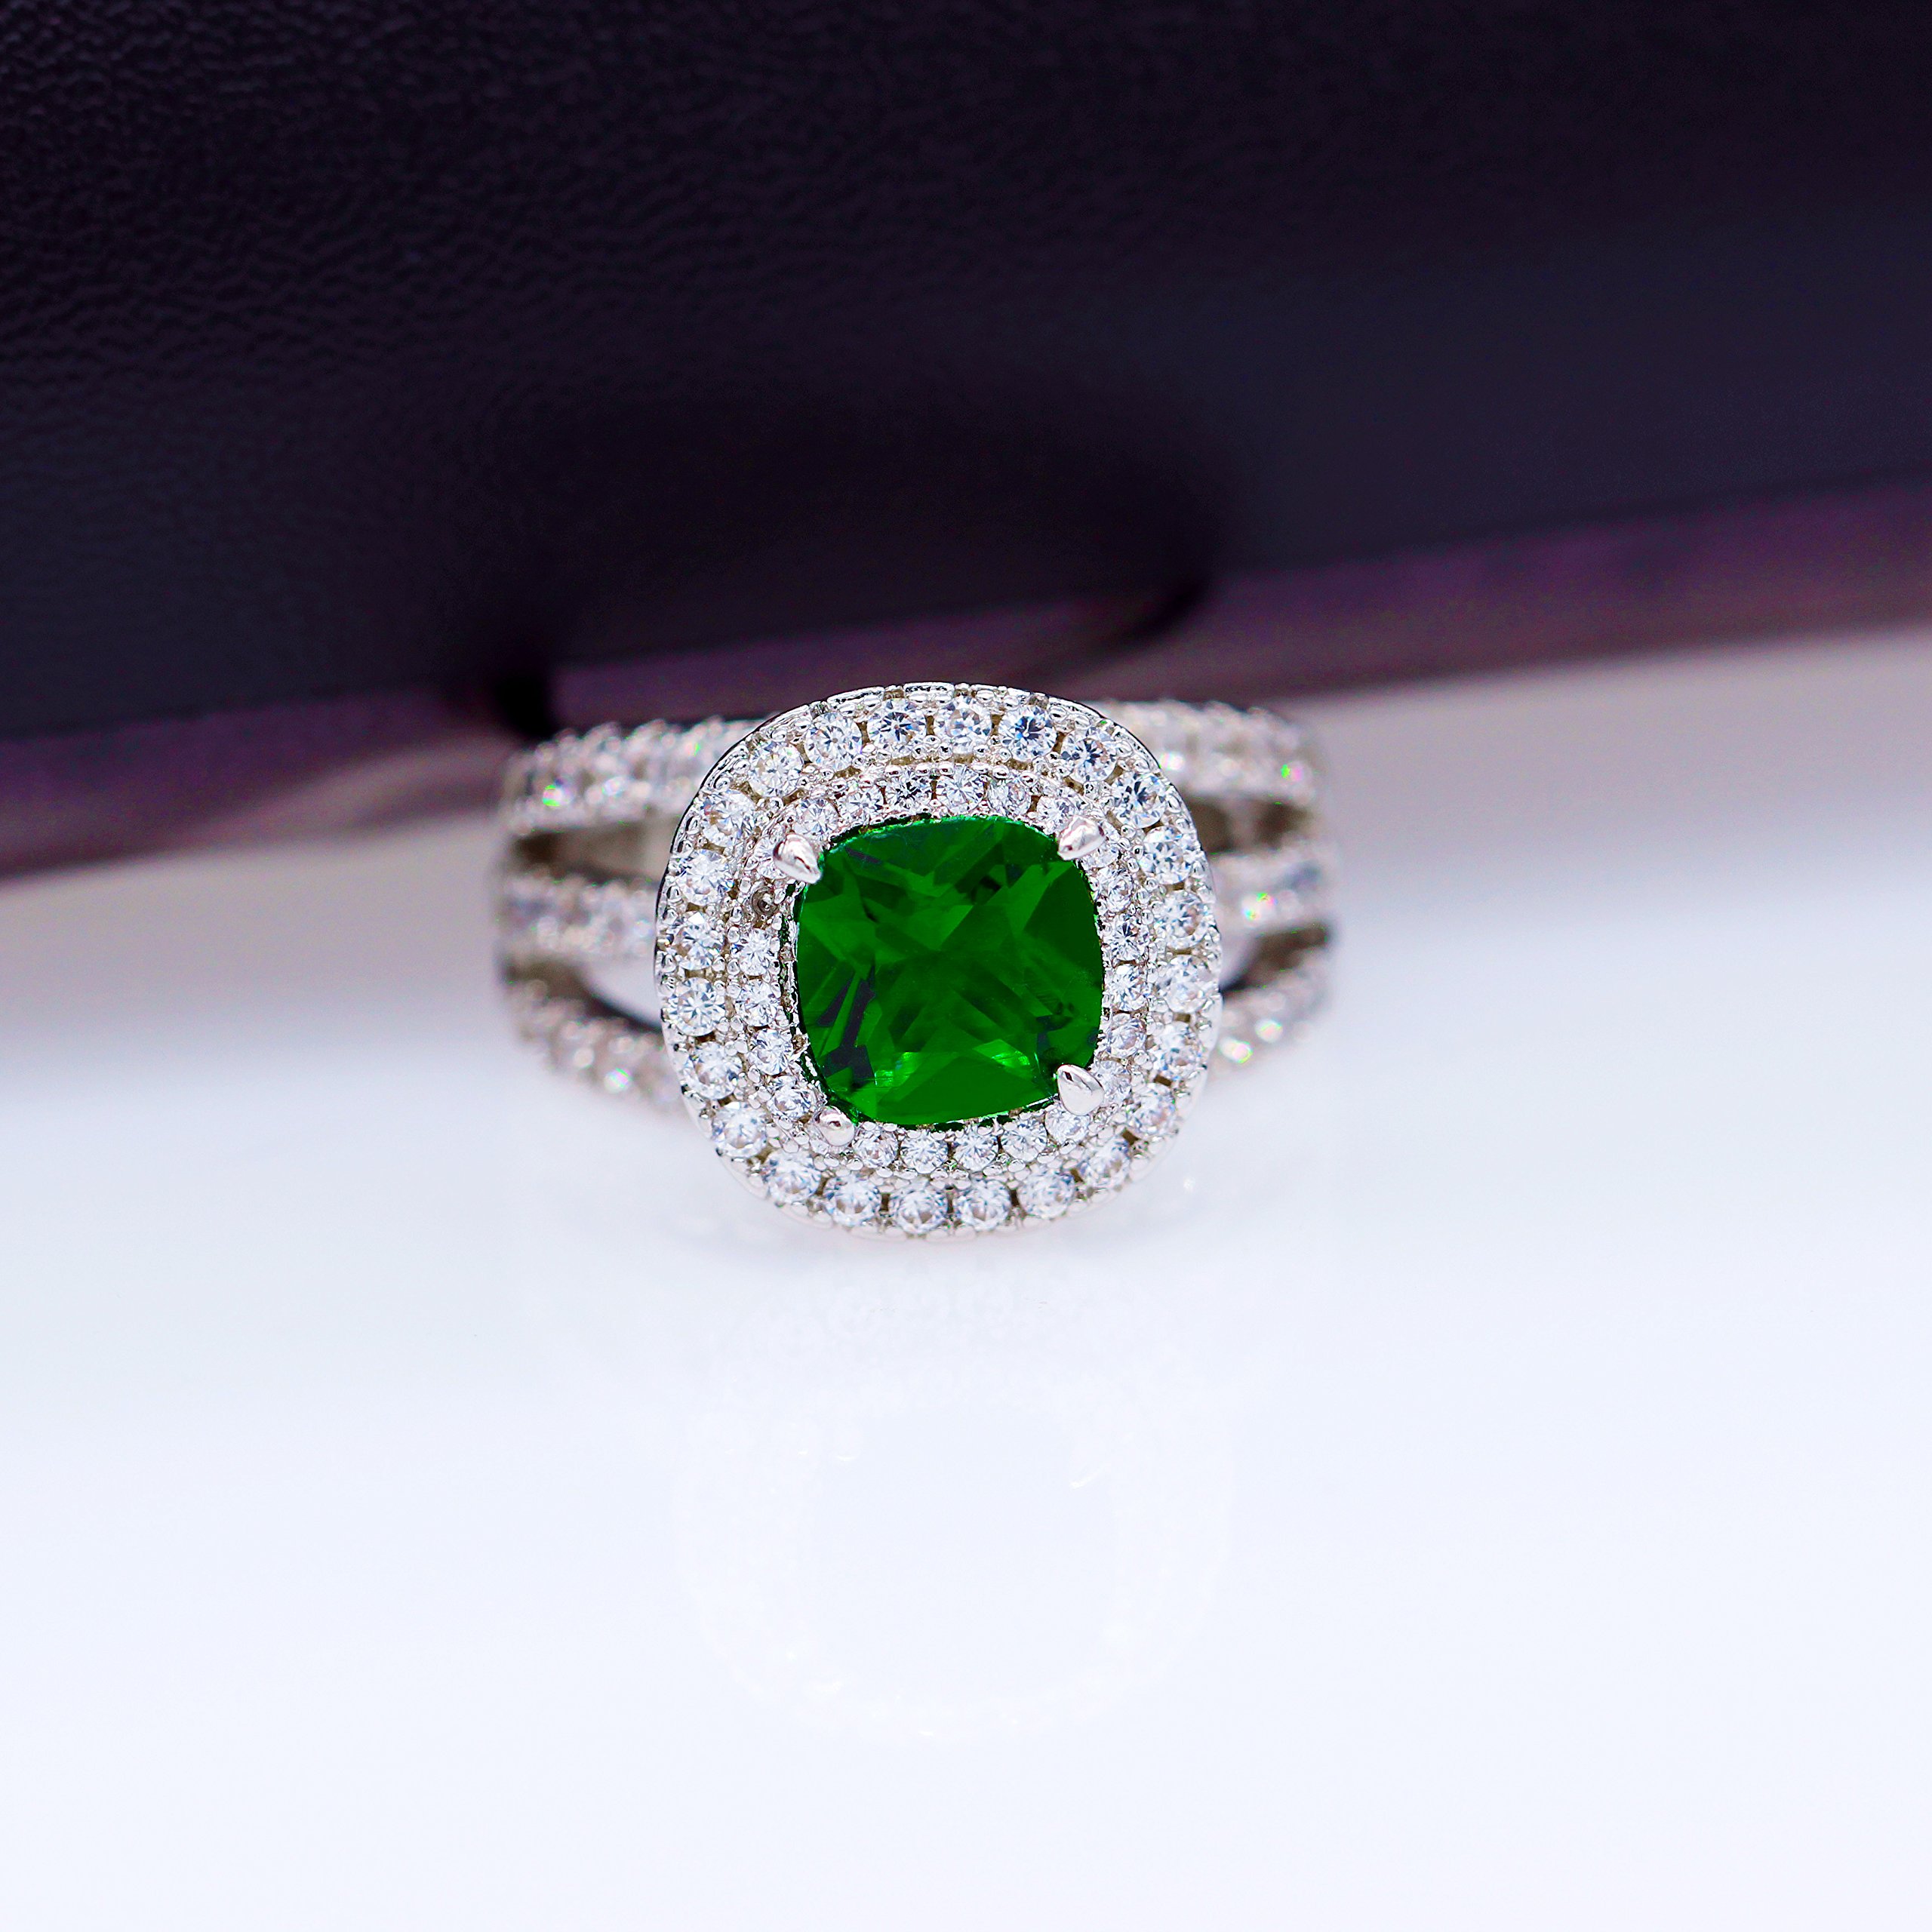 Uloveido Large Simulated Emerald Statement Halo Cocktail Ring with Green Crystal for Women Party Anniversary RJ213